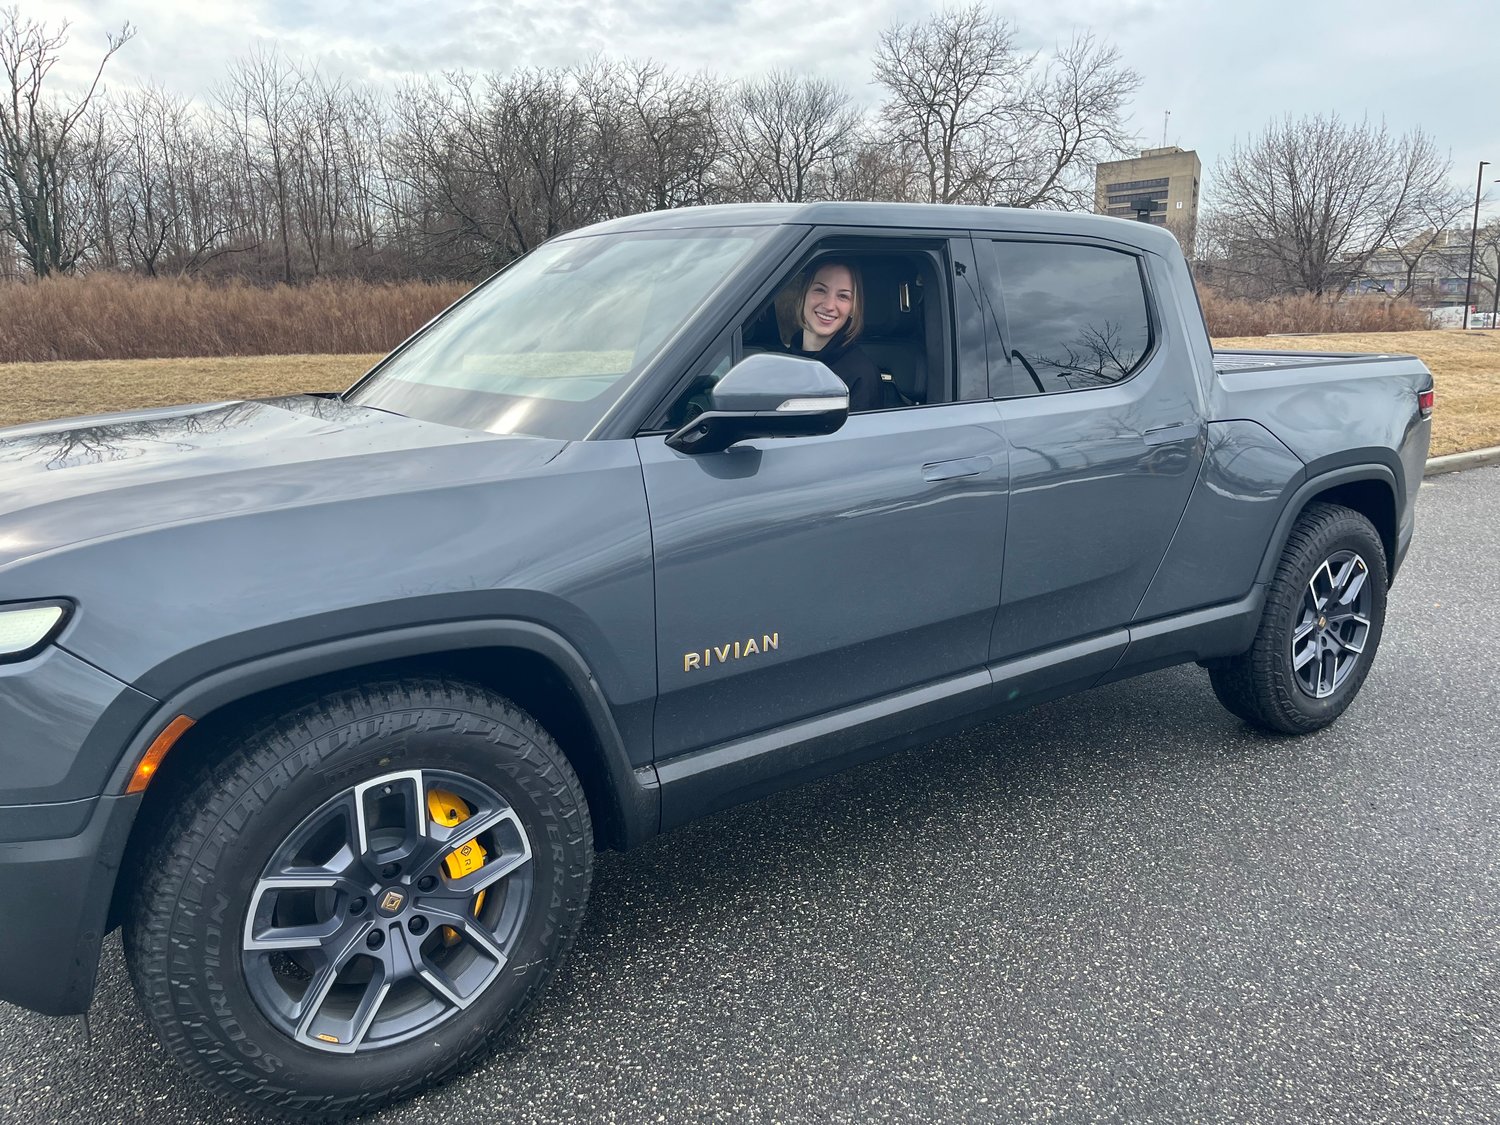 The Rivian pickup truck weighs 6,800 pounds, but on a test drive the ride was smooth and quiet.